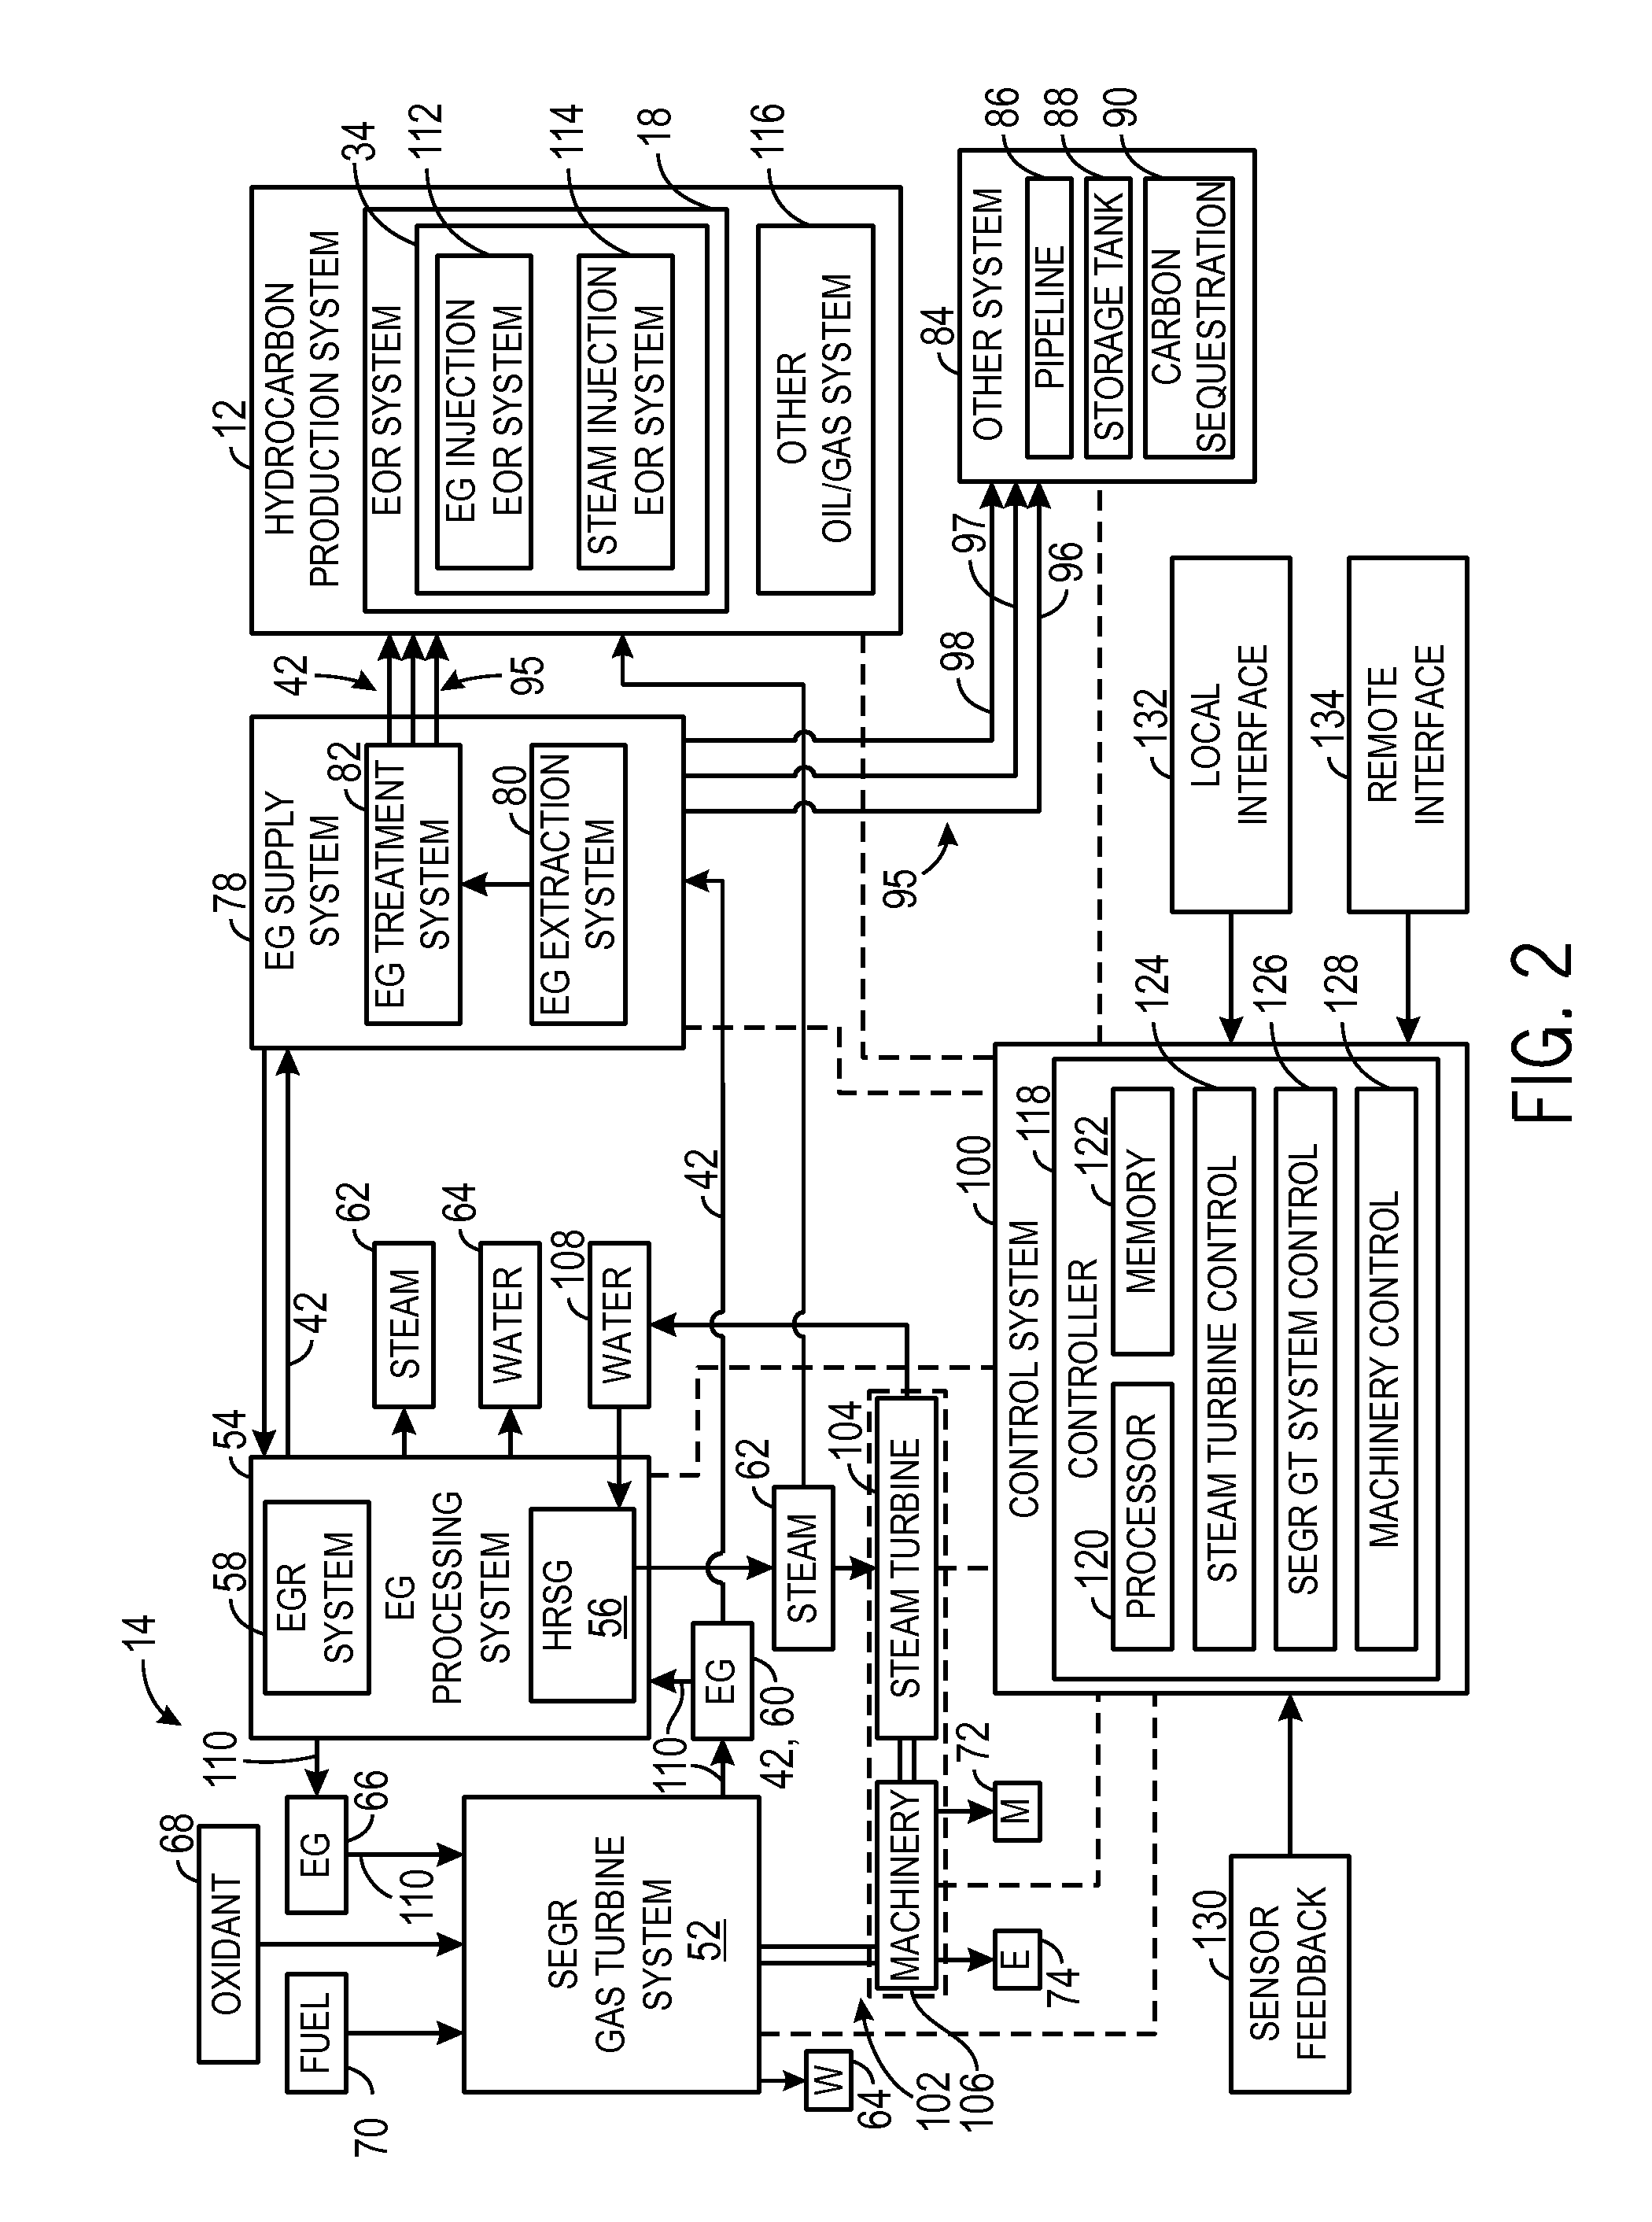 Gas turbine combustor diagnostic system and method